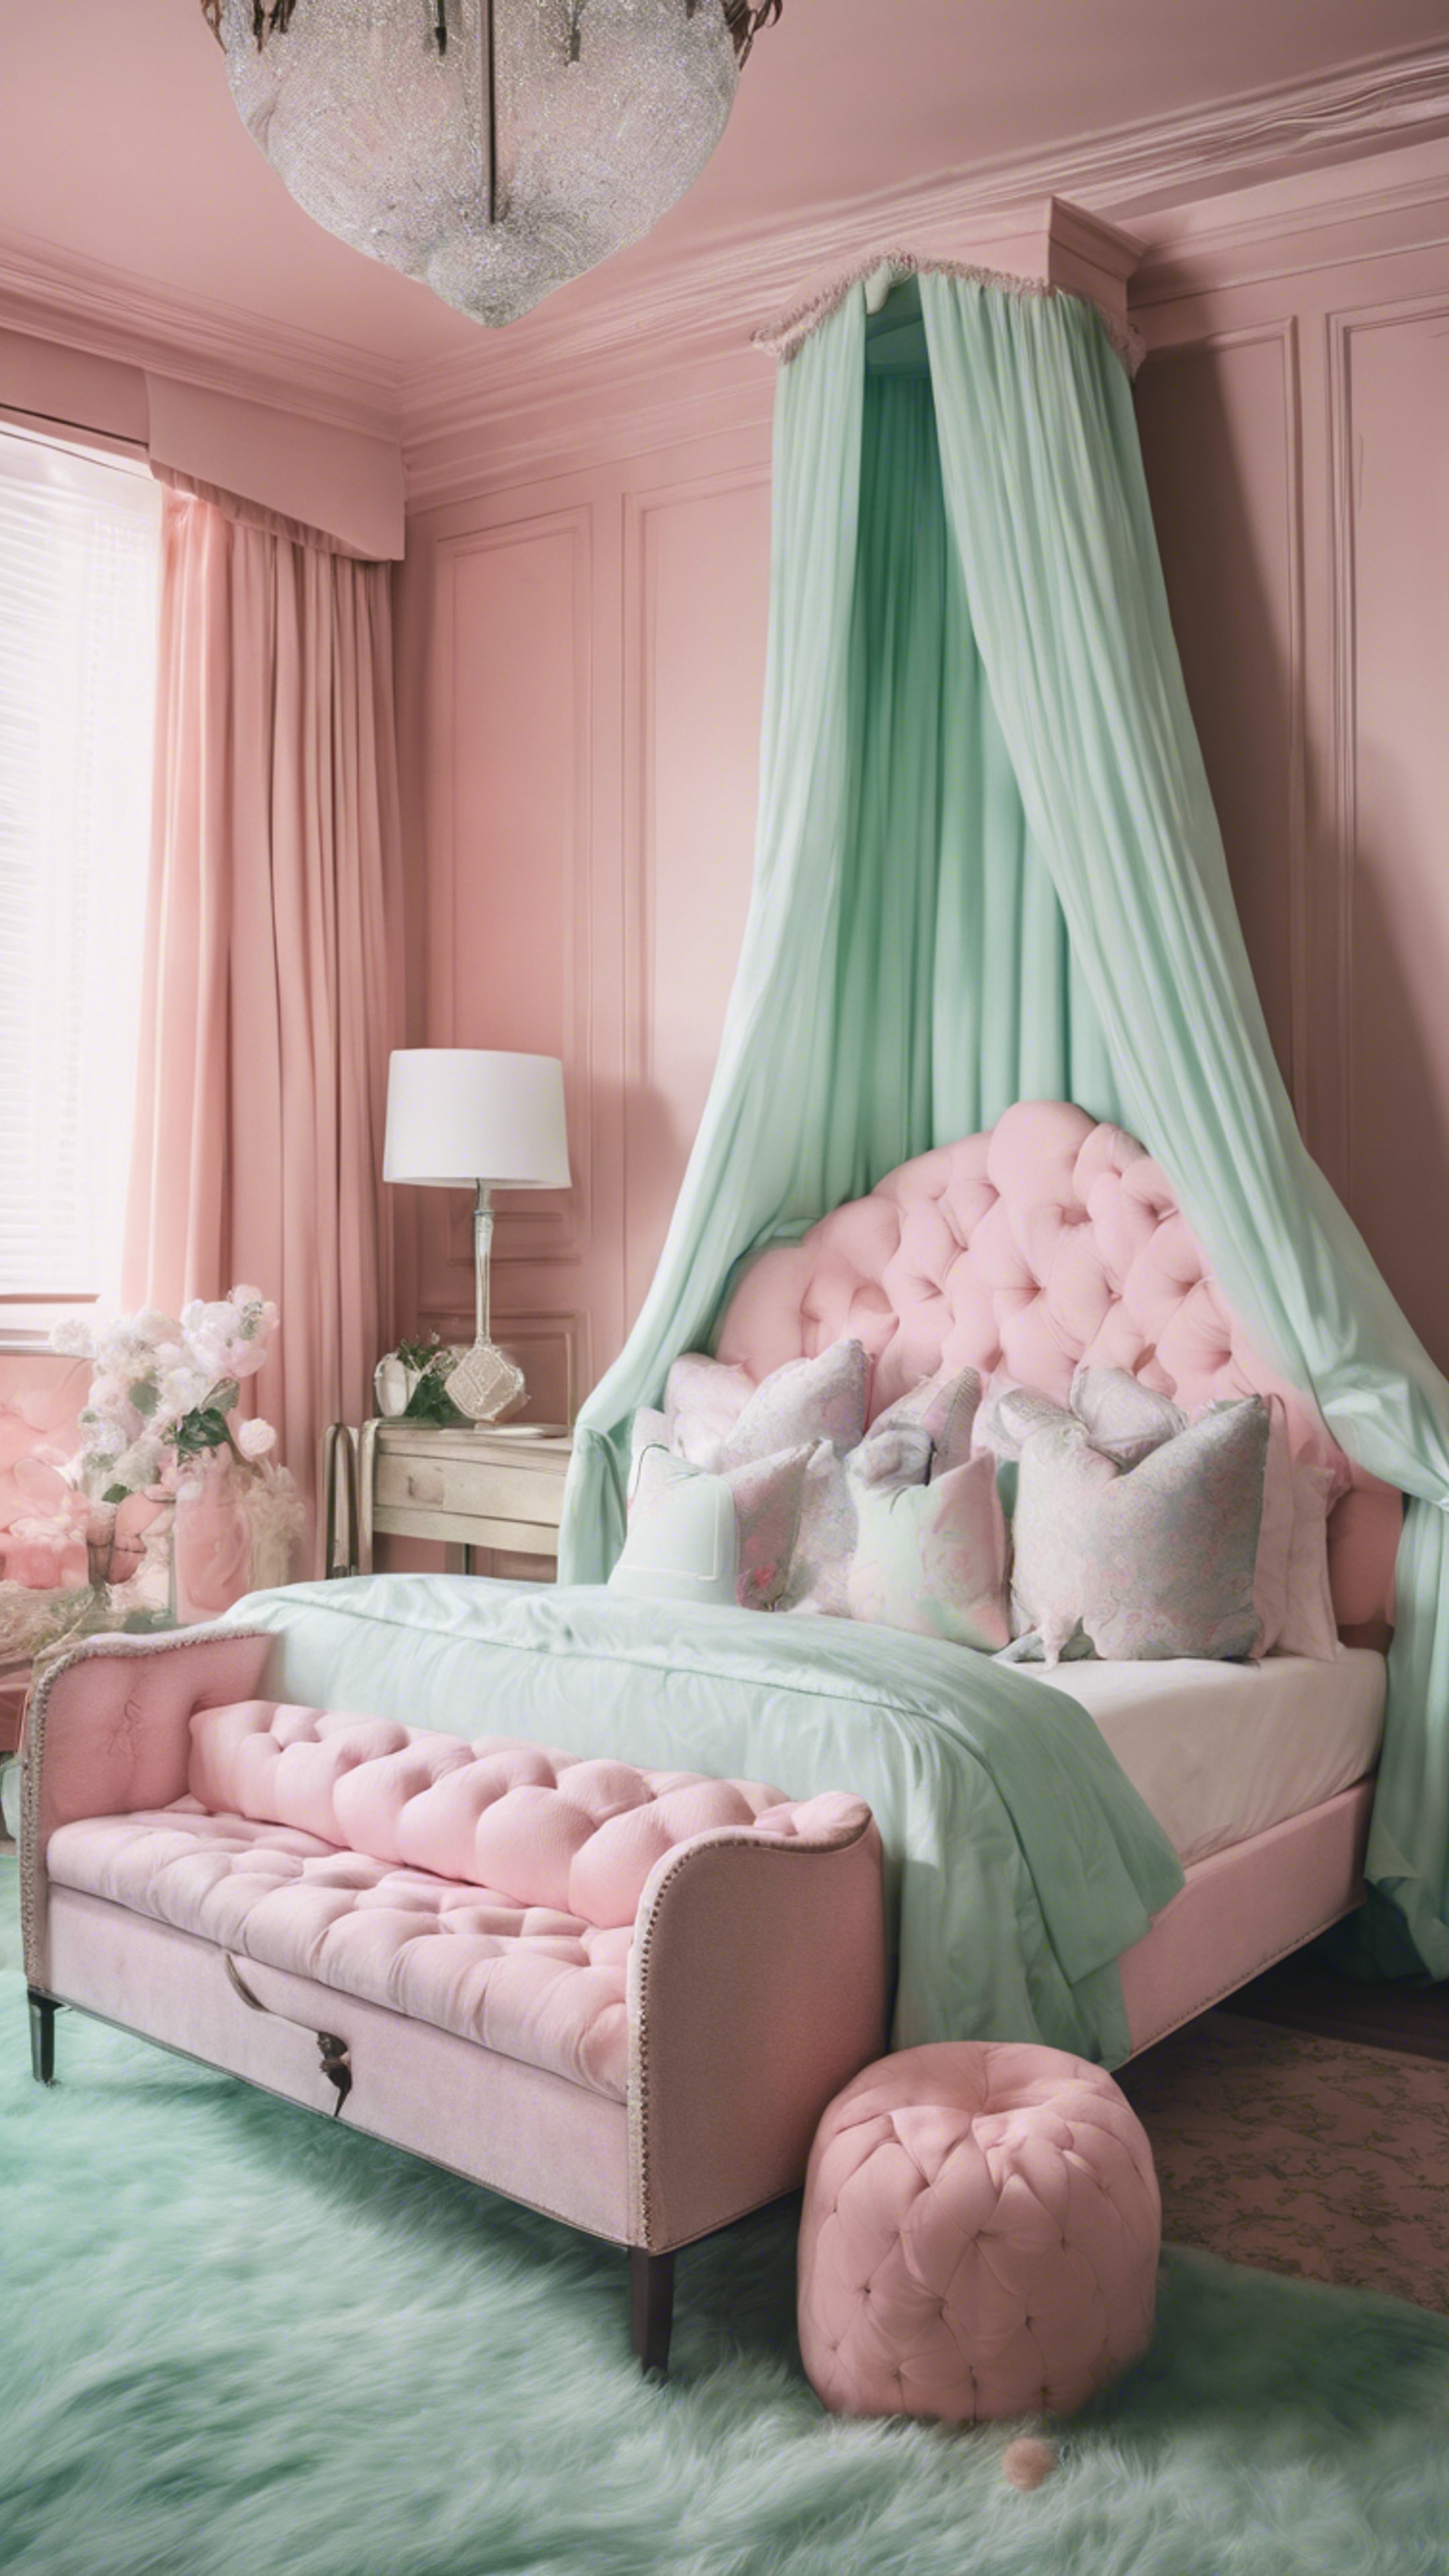 A sprawling pink and mint green preppy-style bedroom with a canopy bed and monogrammed pillows. Wallpaper[80ed71ae36e84fc093e2]